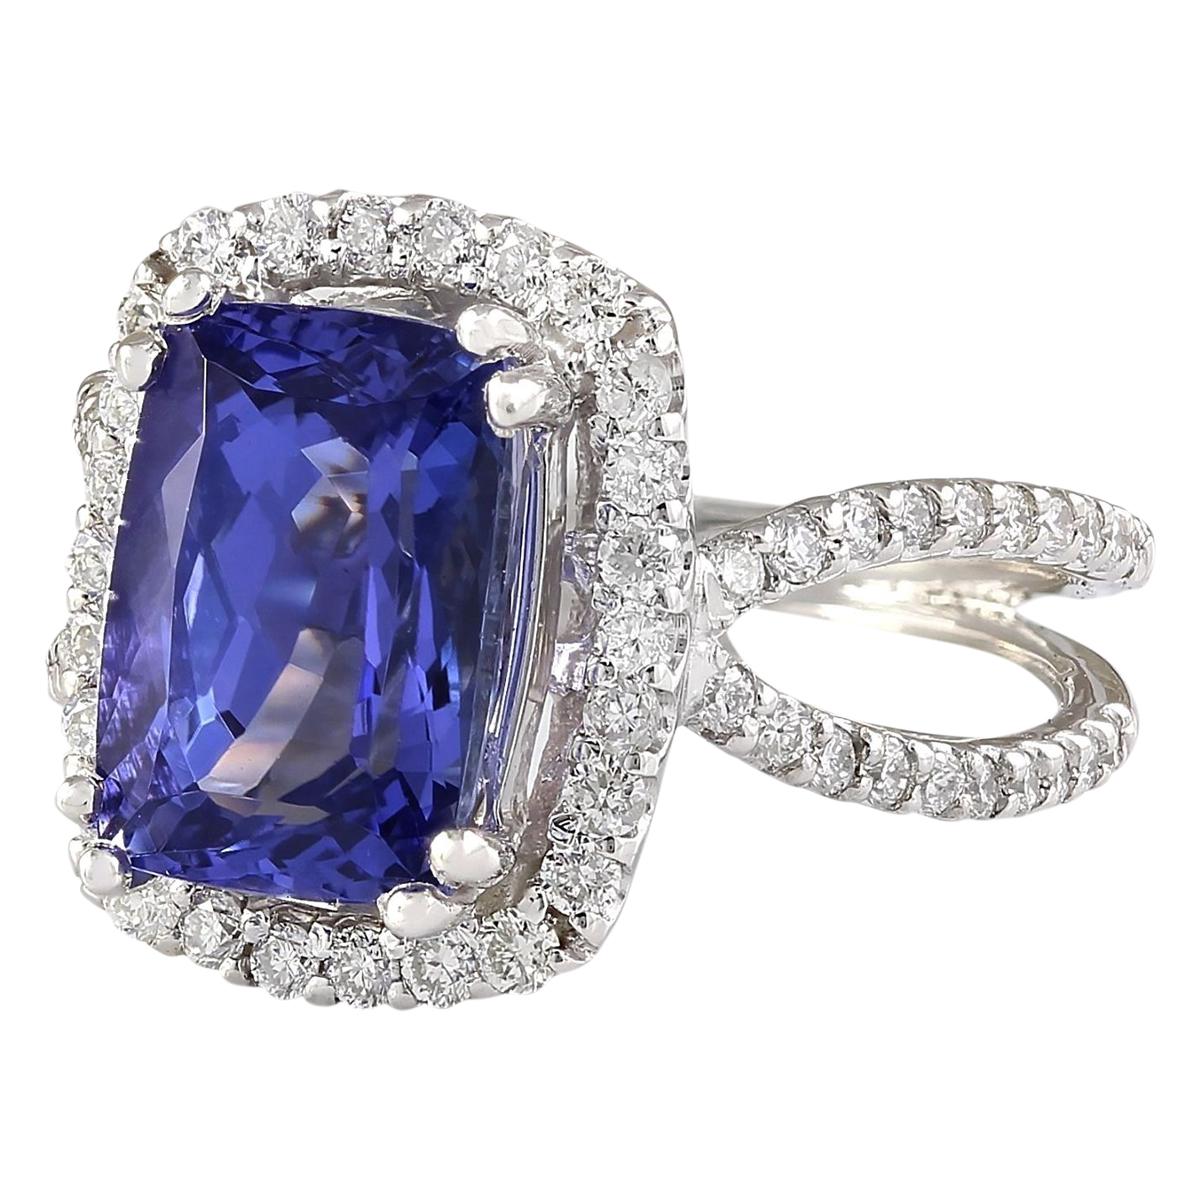 Stamped: 14K White Gold
Total Ring Weight: 6.5 Grams
Total Natural Tanzanite Weight is 5.02 Carat (Measures: 10.00x8.00 mm)
Color: Blue
Total Natural Diamond Weight is 0.75 Carat
Color: F-G, Clarity: VS2-SI1
Face Measures: 14.90x12.35 mm
Sku: